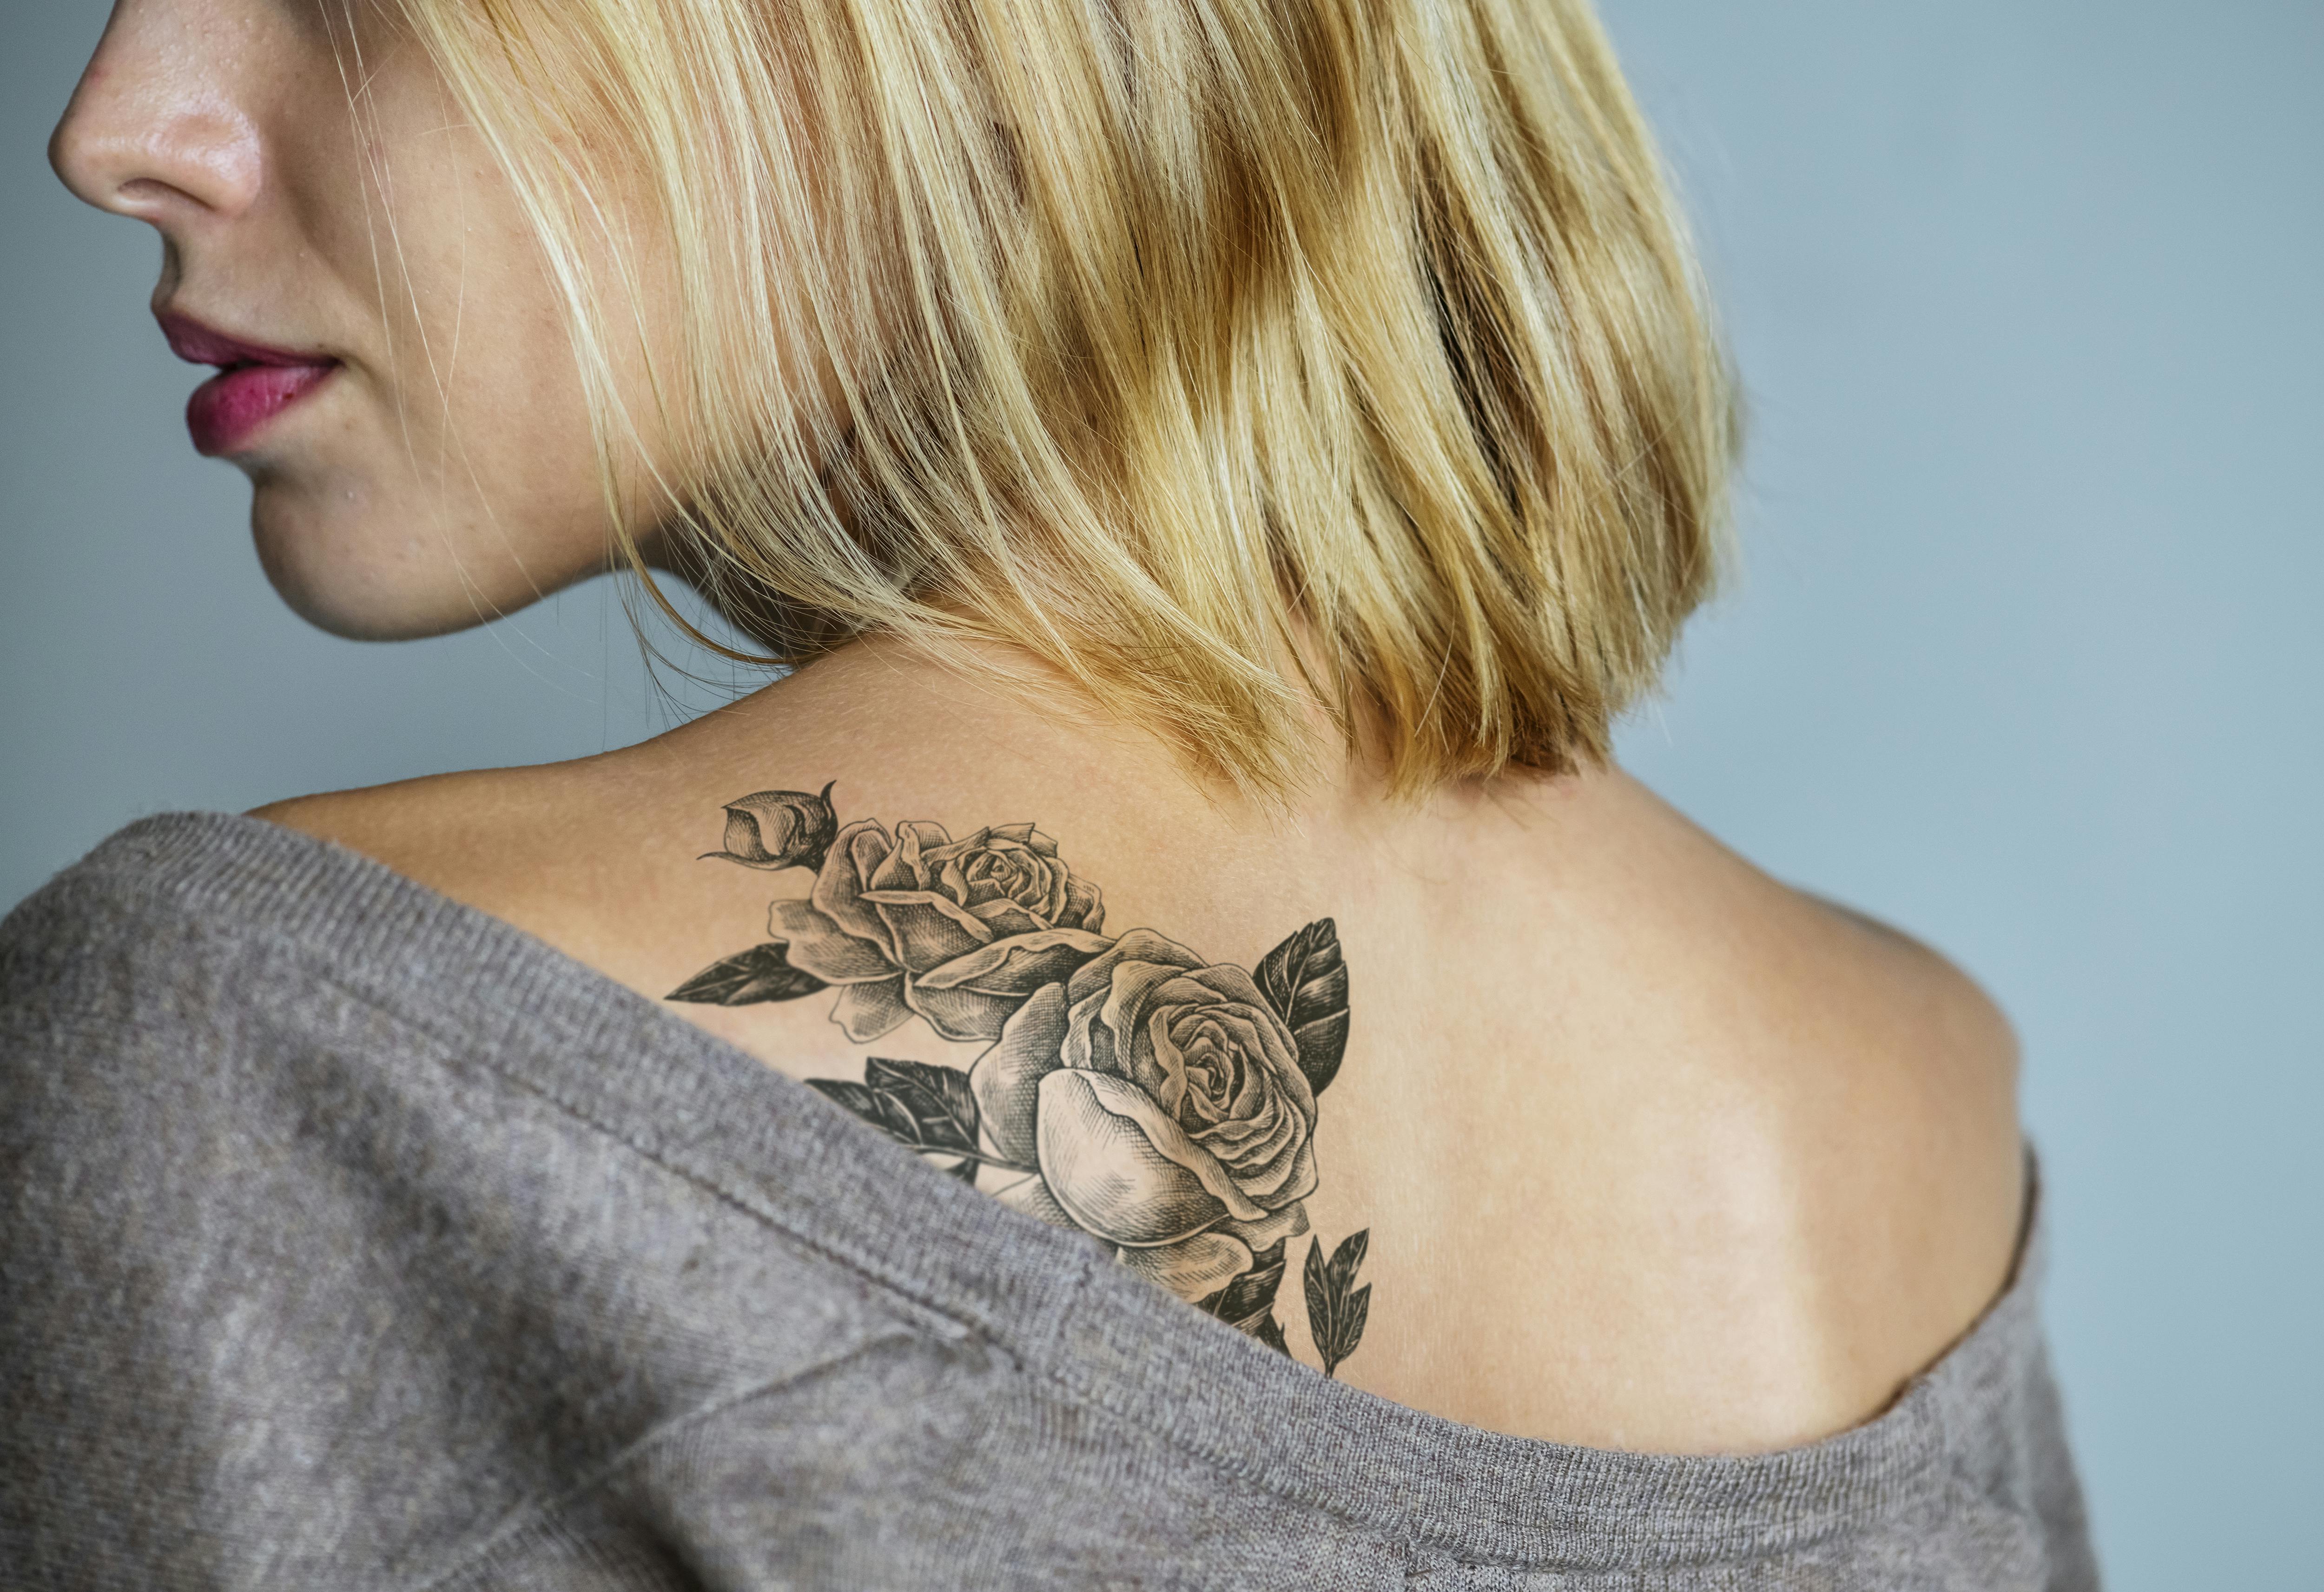 29 Stupefying Cupid Tattoo Ideas To Show Your Love